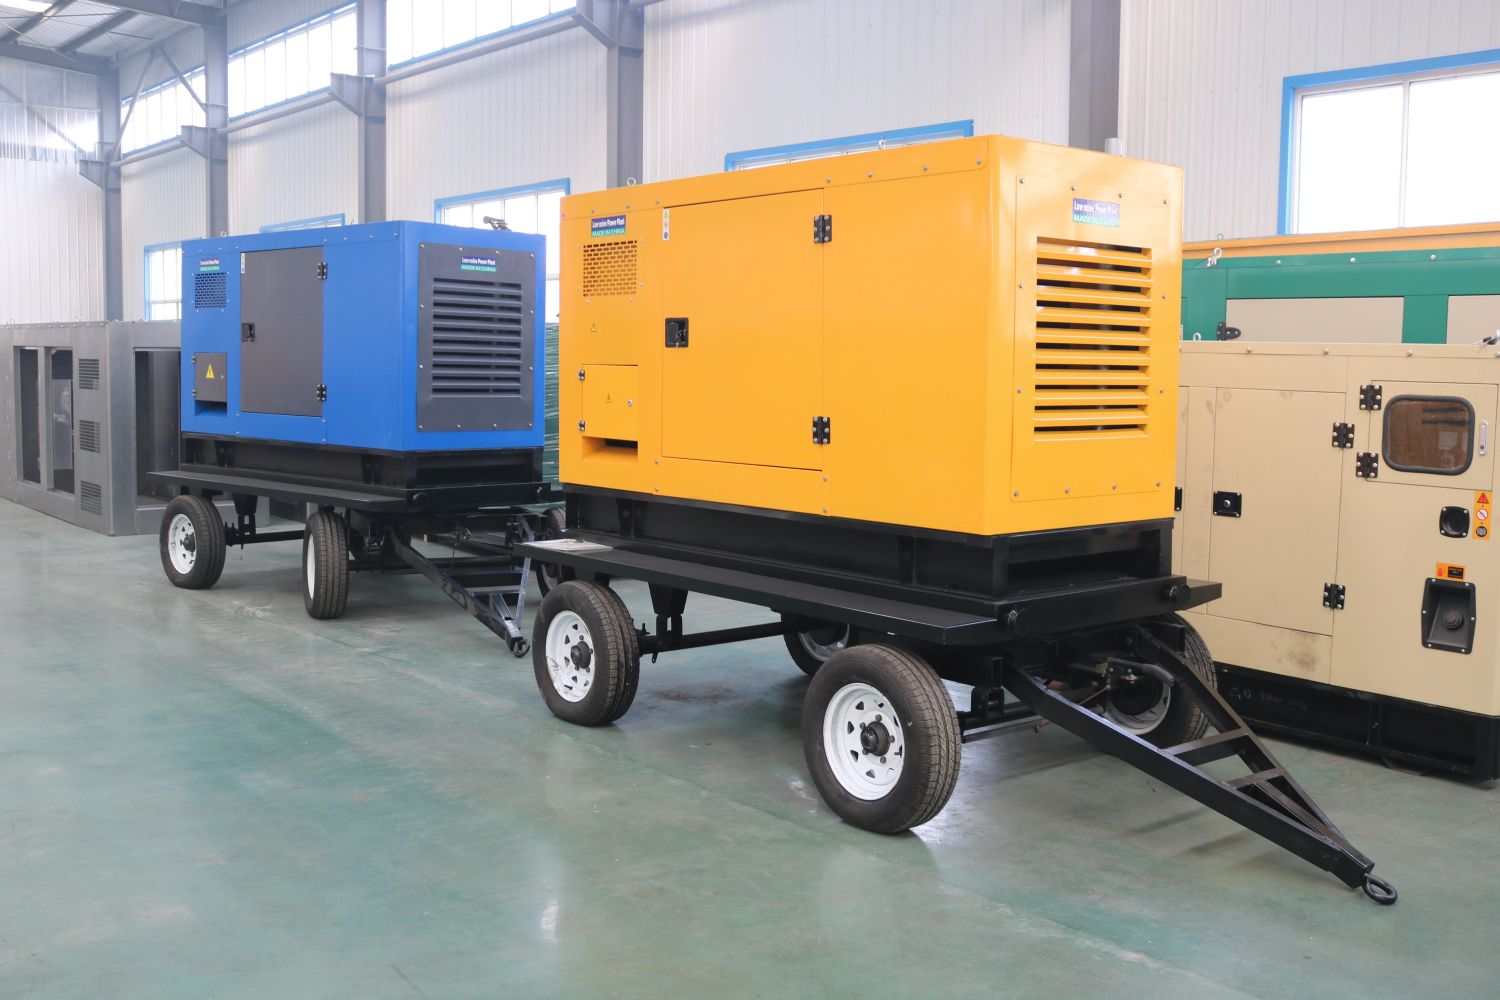 United Arab Emirates Diesel Generator Set Market Analysis Report 2022: Increasing Number of Data Centers & Rising Number of Infrastructure Projects - Industry Forecast to 2030